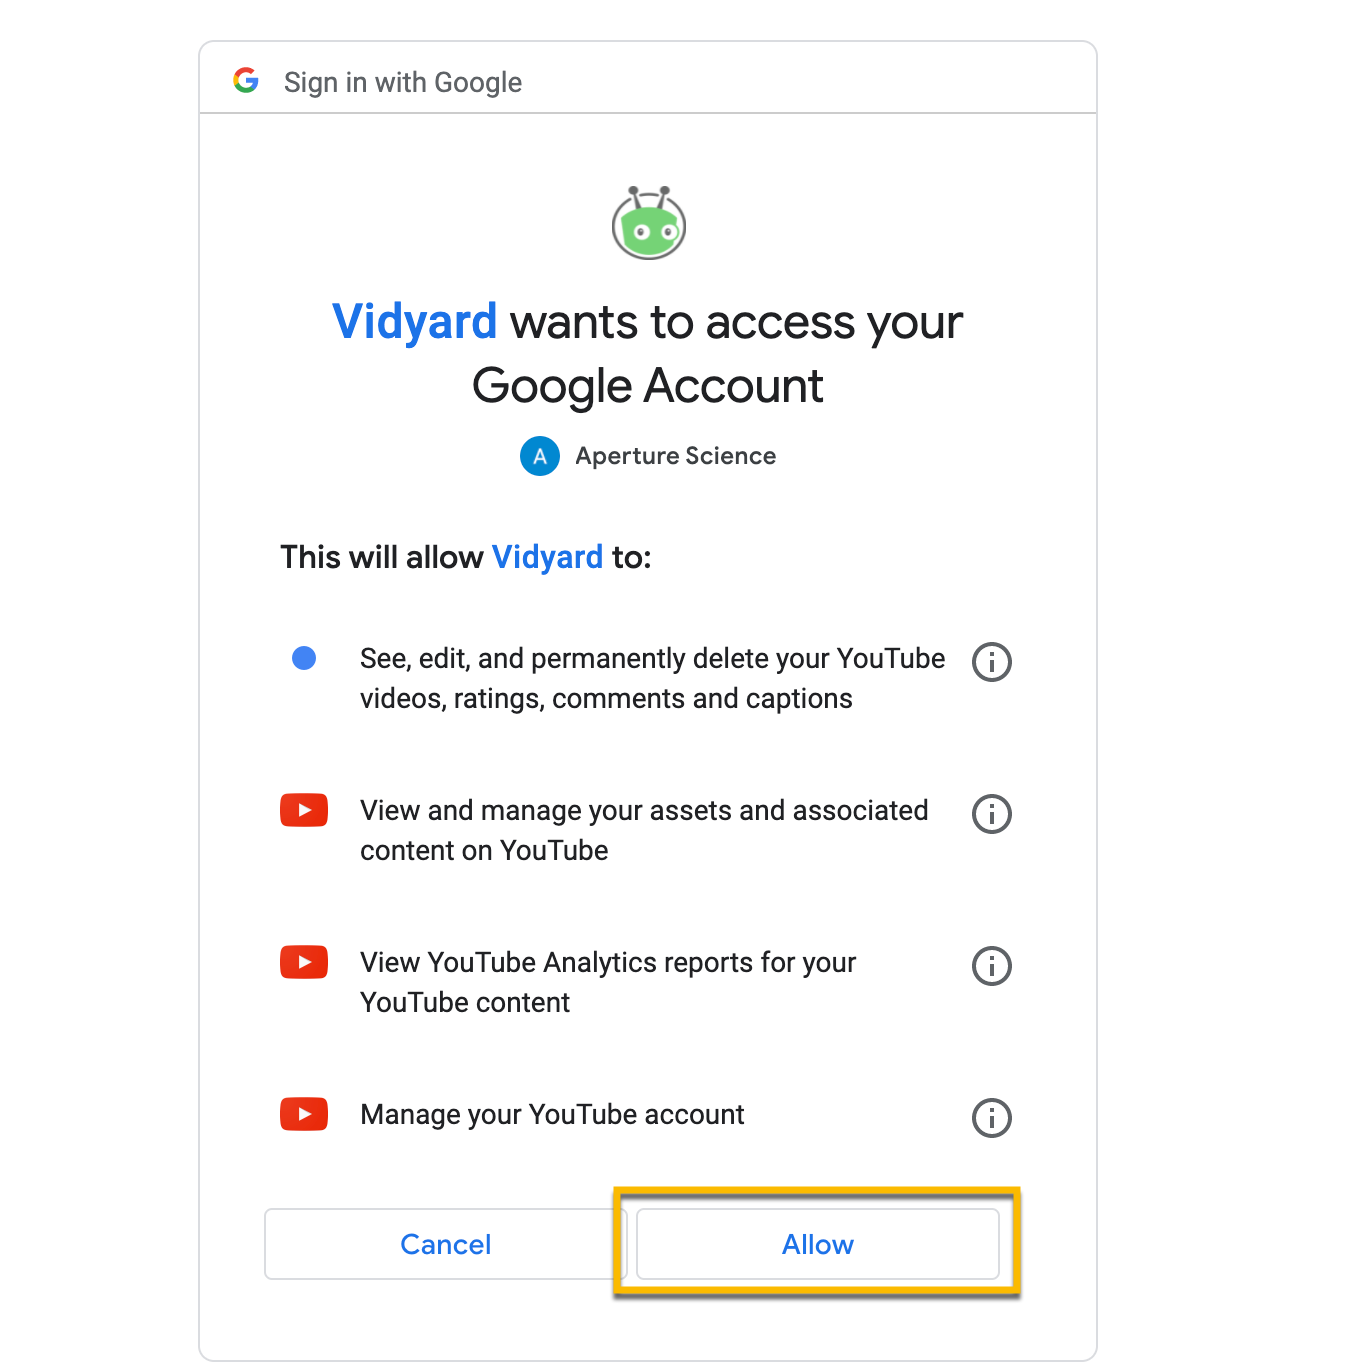 A prompt from Google indicating what aspects of your account Vidyard will have access to, with the option to Allow